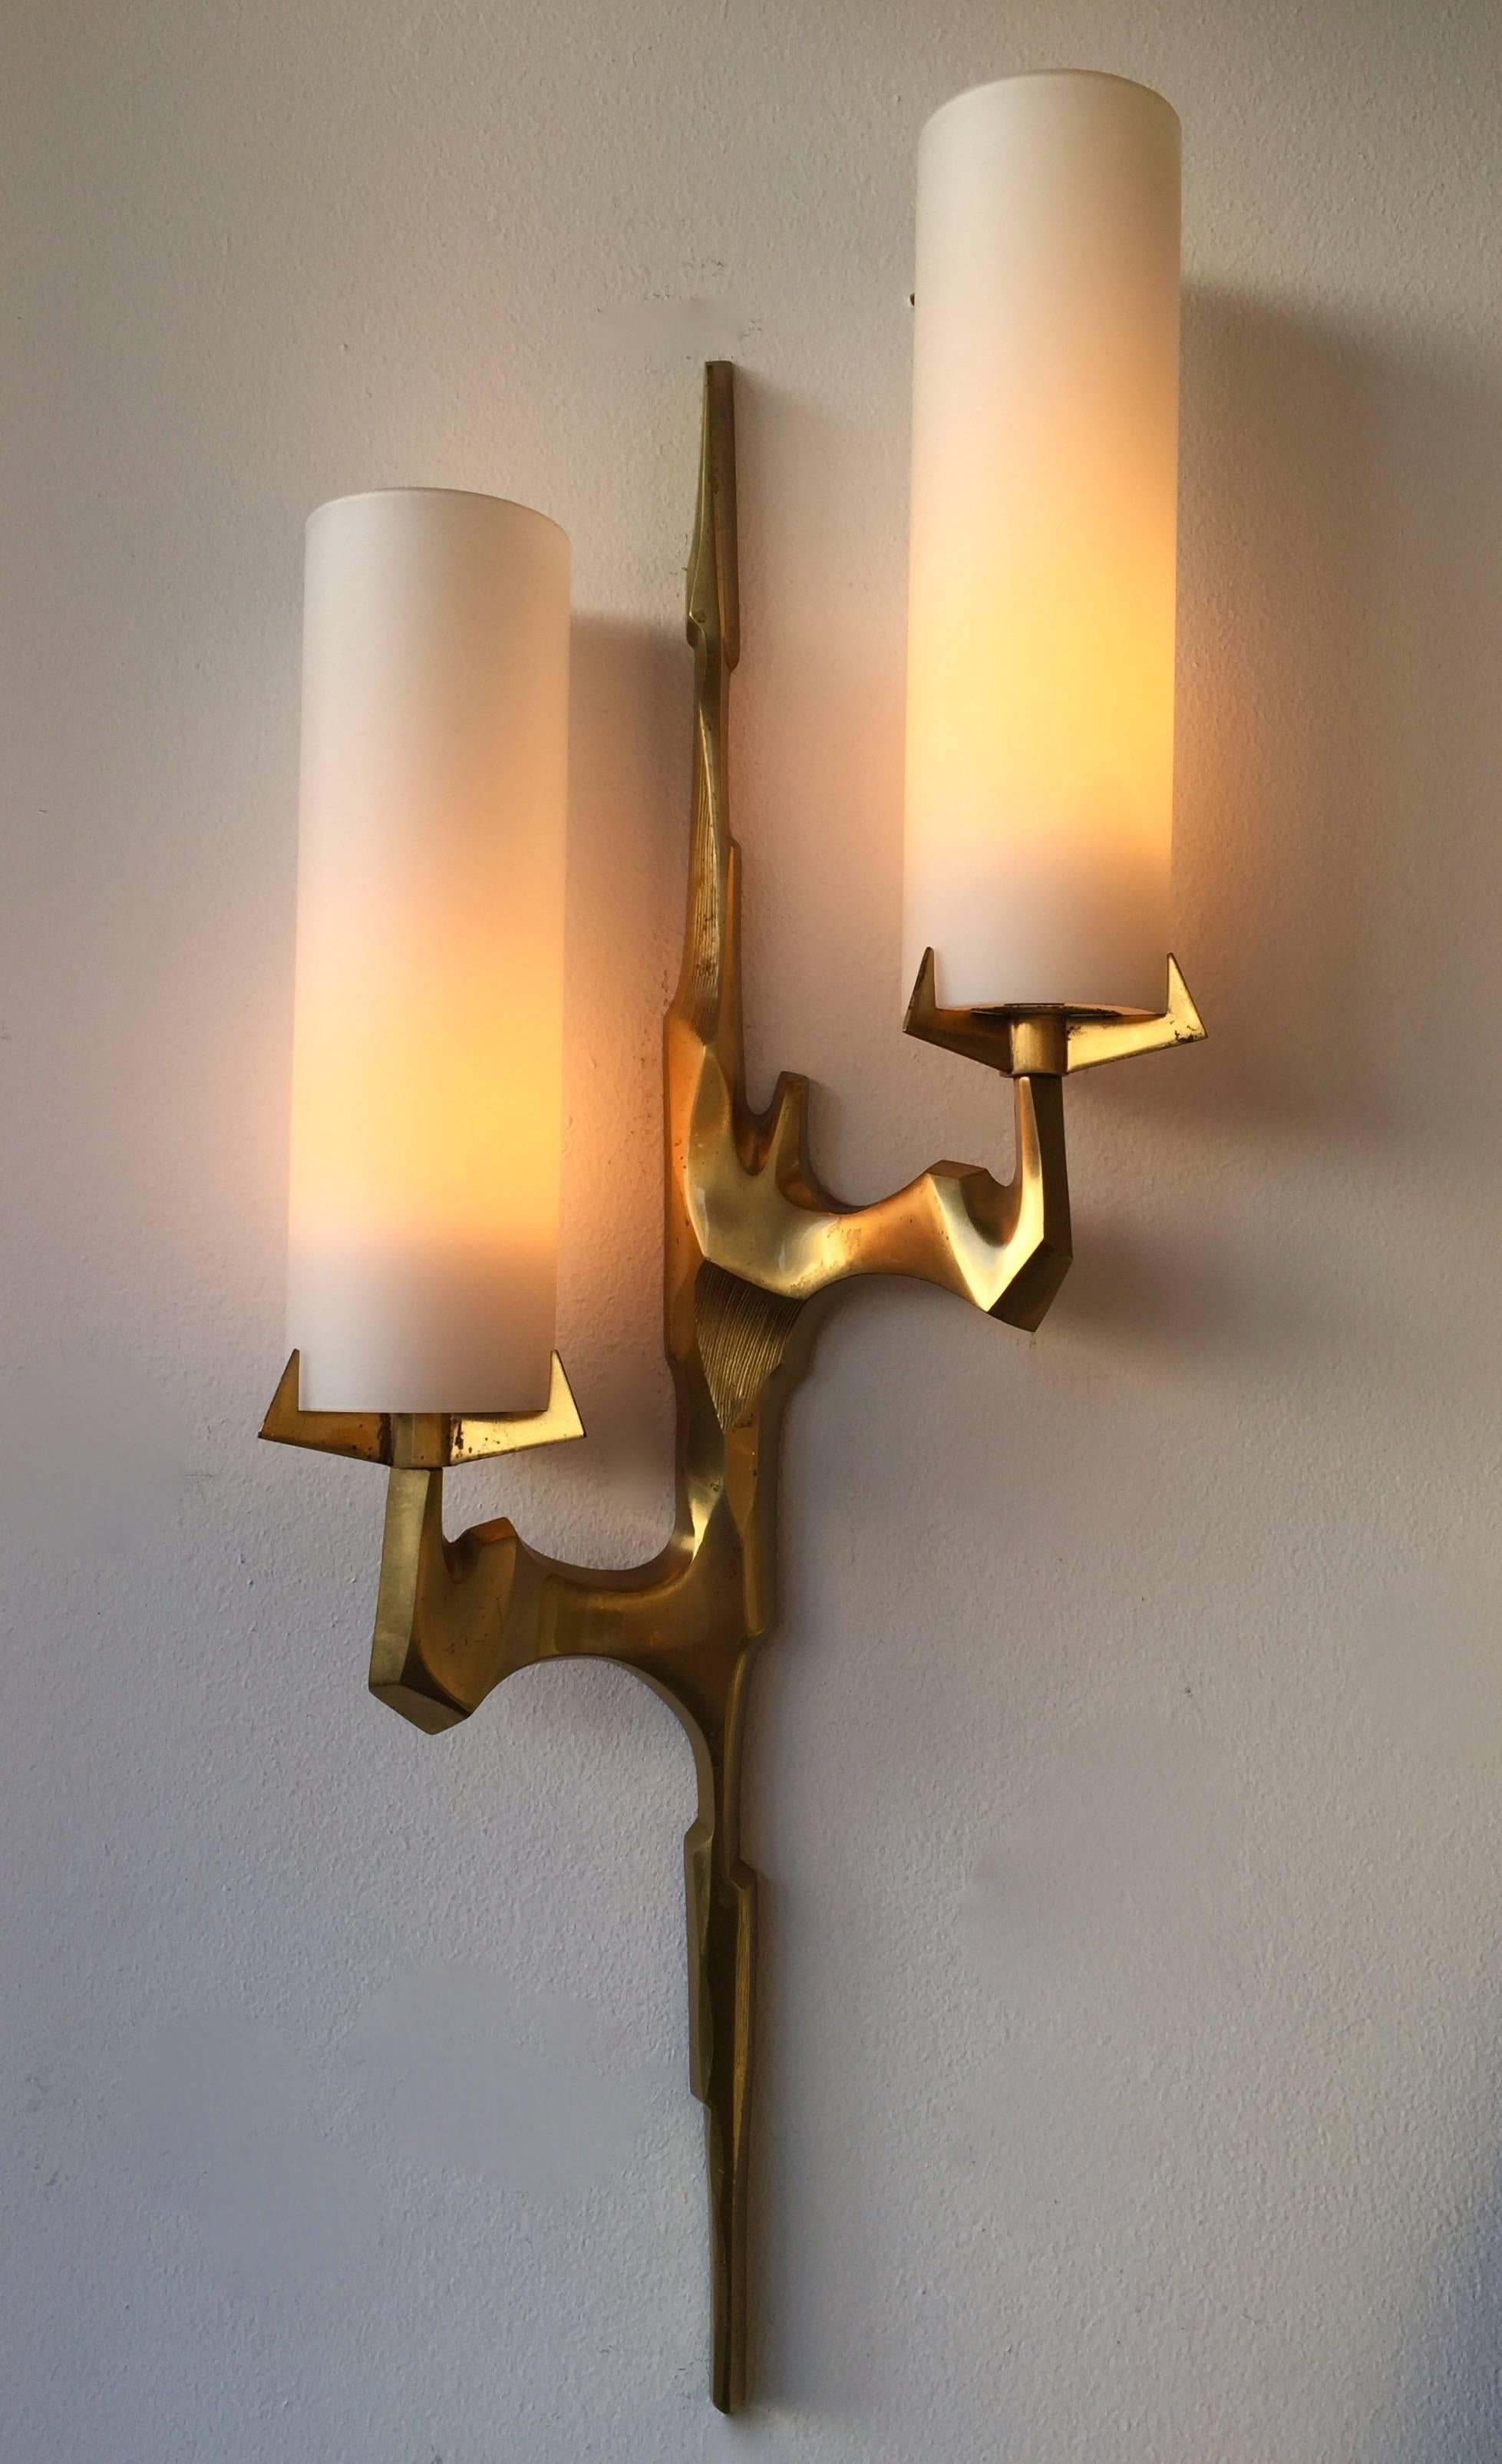 Mid-Century Modern pair of sconces or wall lights by Maison Arlus based on drawing of Felix Agostini for the manufacture. In cast gilt bronze, very interesting and sculptural model. Original opaline glass tube in perfect condition. Original